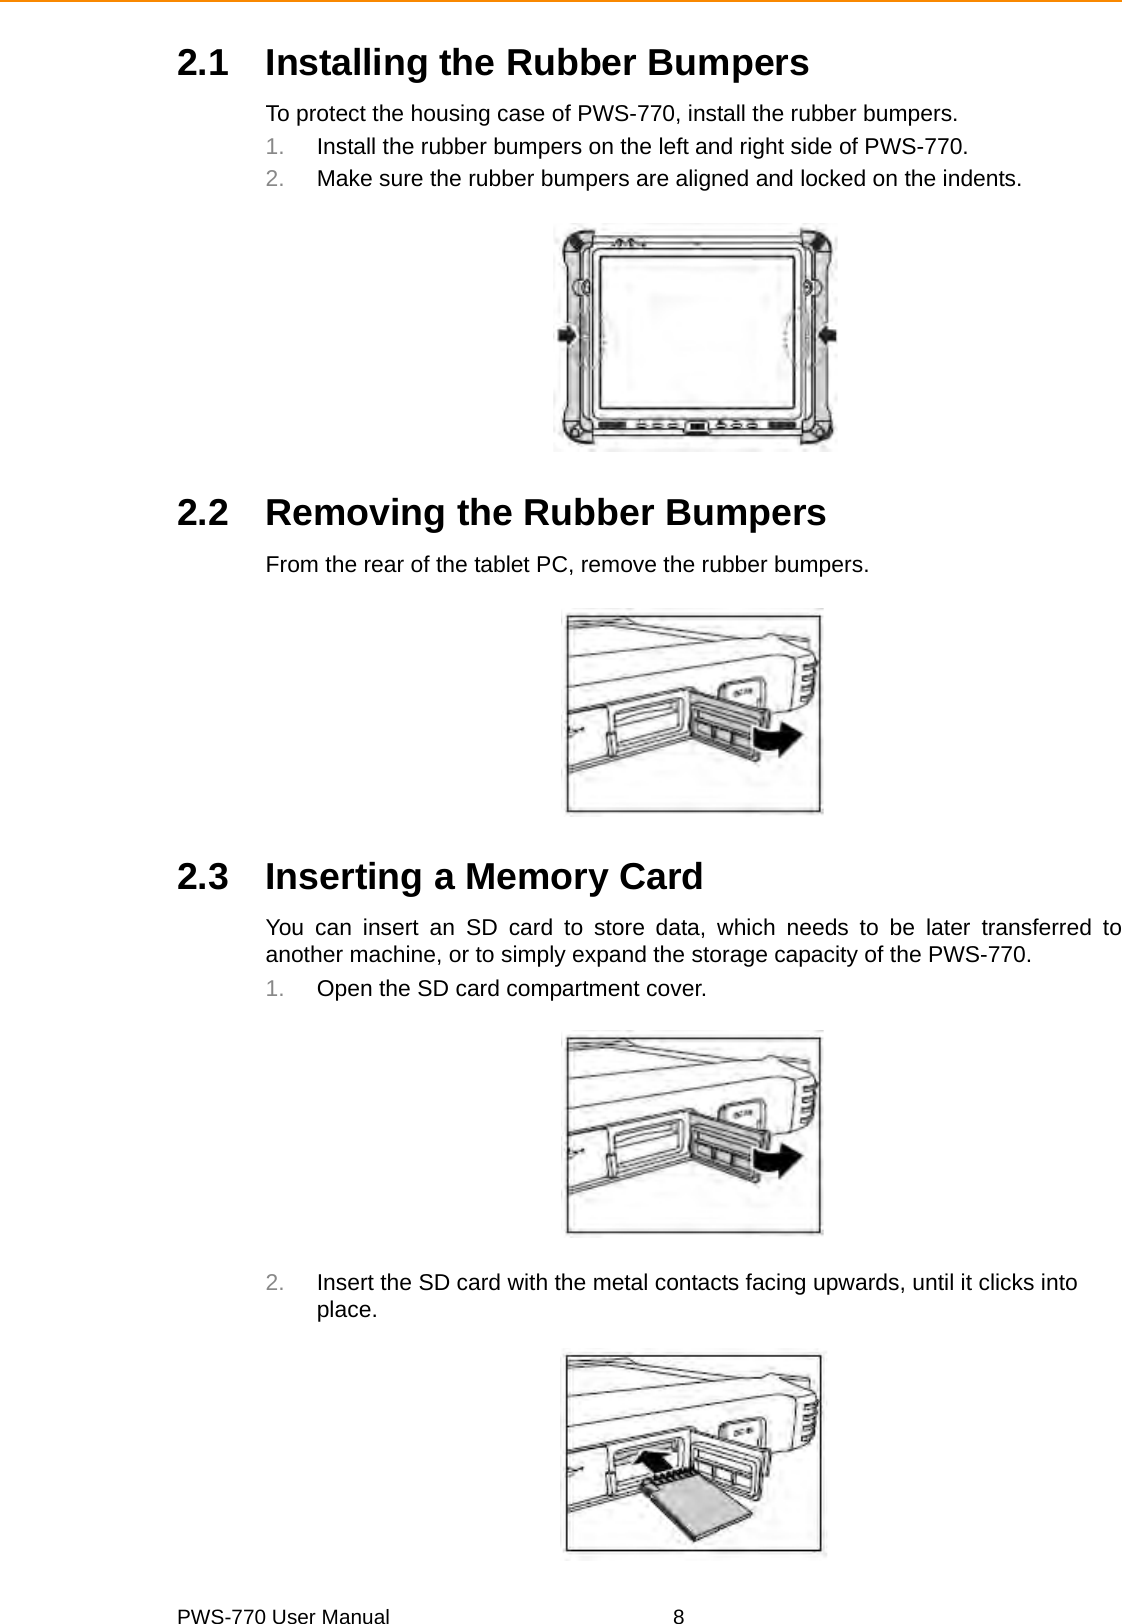 PWS-770 User Manual 82.1 Installing the Rubber BumpersTo protect the housing case of PWS-770, install the rubber bumpers.1. Install the rubber bumpers on the left and right side of PWS-770.2. Make sure the rubber bumpers are aligned and locked on the indents.2.2 Removing the Rubber BumpersFrom the rear of the tablet PC, remove the rubber bumpers.2.3 Inserting a Memory CardYou can insert an SD card to store data, which needs to be later transferred toanother machine, or to simply expand the storage capacity of the PWS-770. 1. Open the SD card compartment cover.2. Insert the SD card with the metal contacts facing upwards, until it clicks into place.